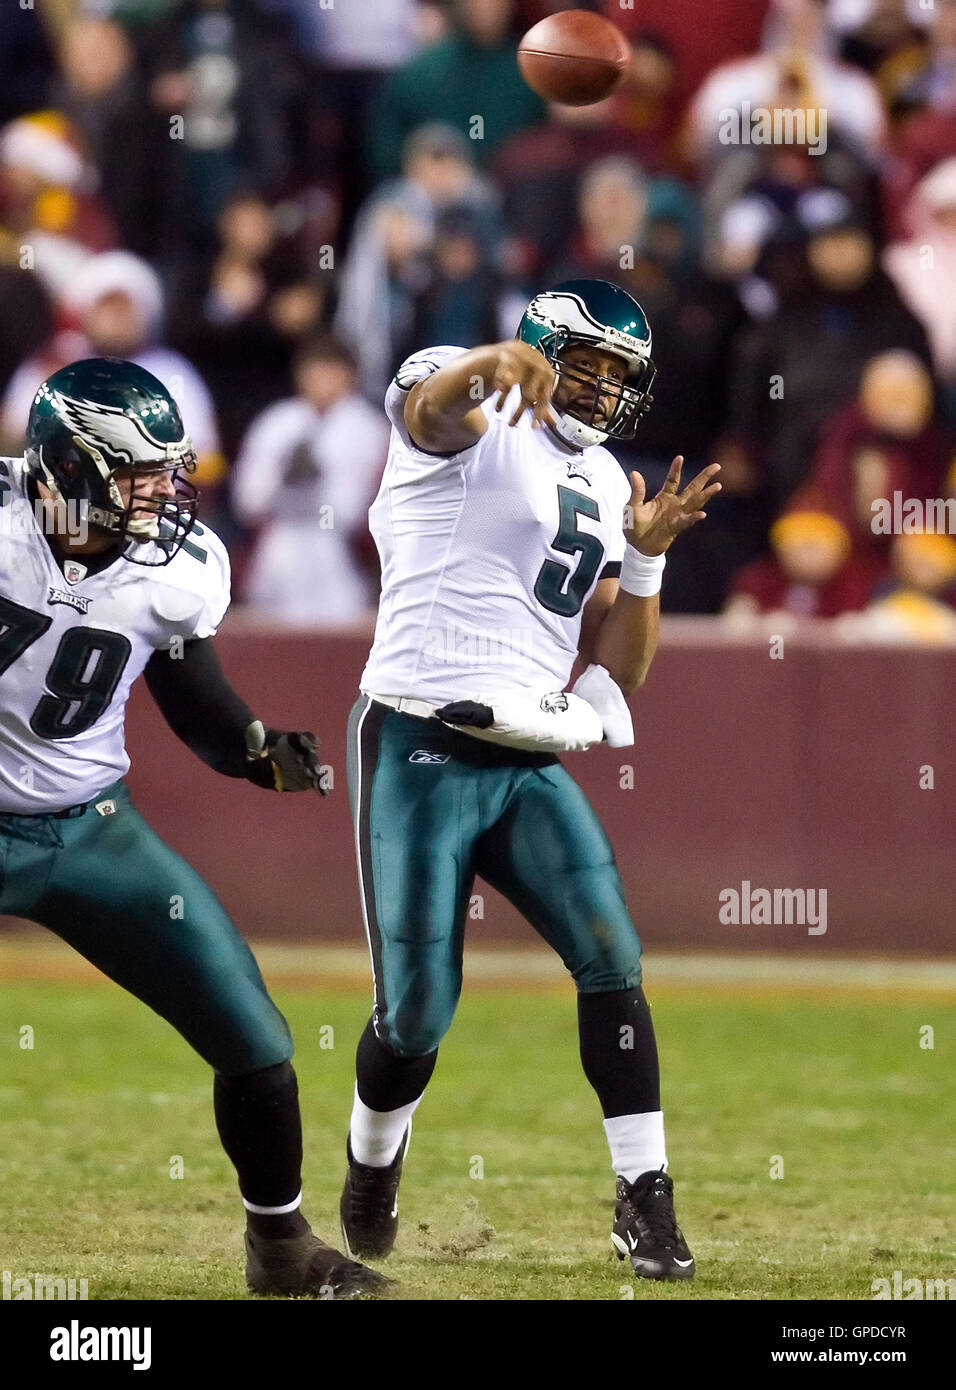 Philadelphia Eagles quarterback Donovan McNabb (5) was forced to the air in the final drive of the game -- an effort that ended the game on the 1 yard line.  The Washington Redskins defeated the Philadelphia Eagles 10-3 in an NFL football game held at Fed Stock Photo